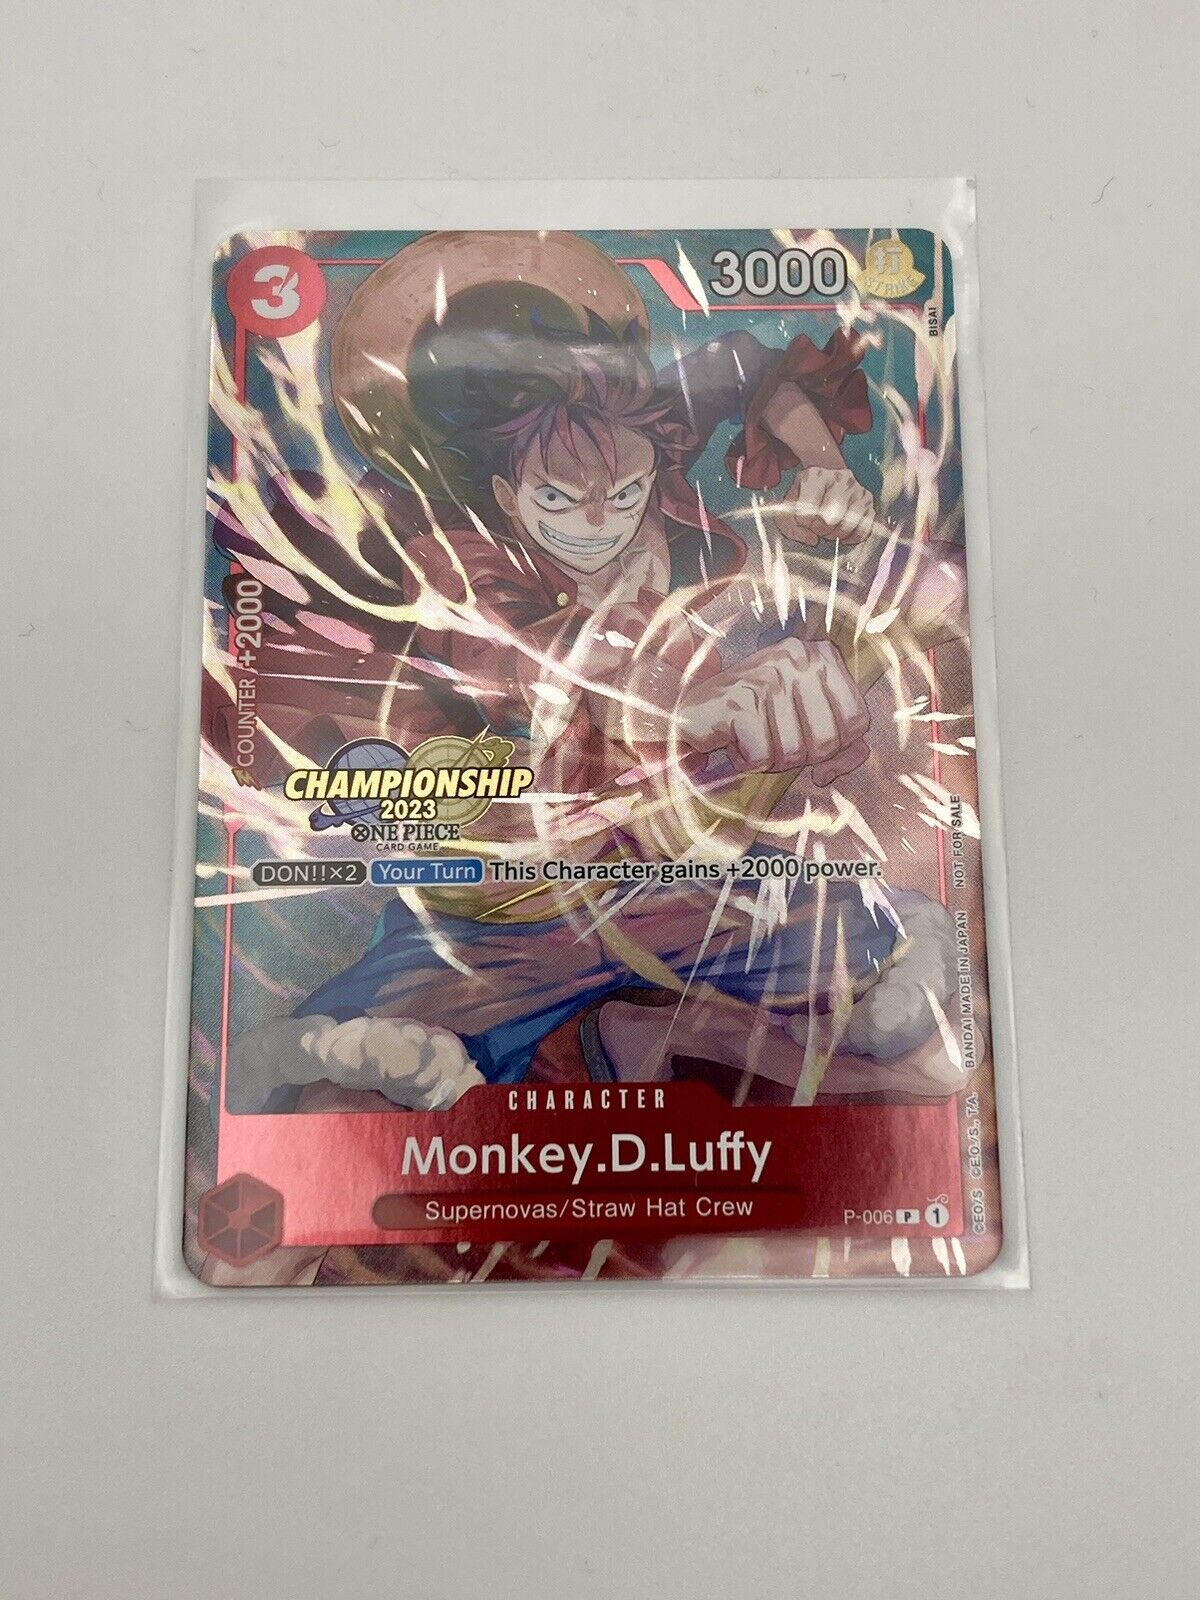 Monkey.D.Luffy - P-006 - Championship 2023 FOIL Promo - One Piece Card Game